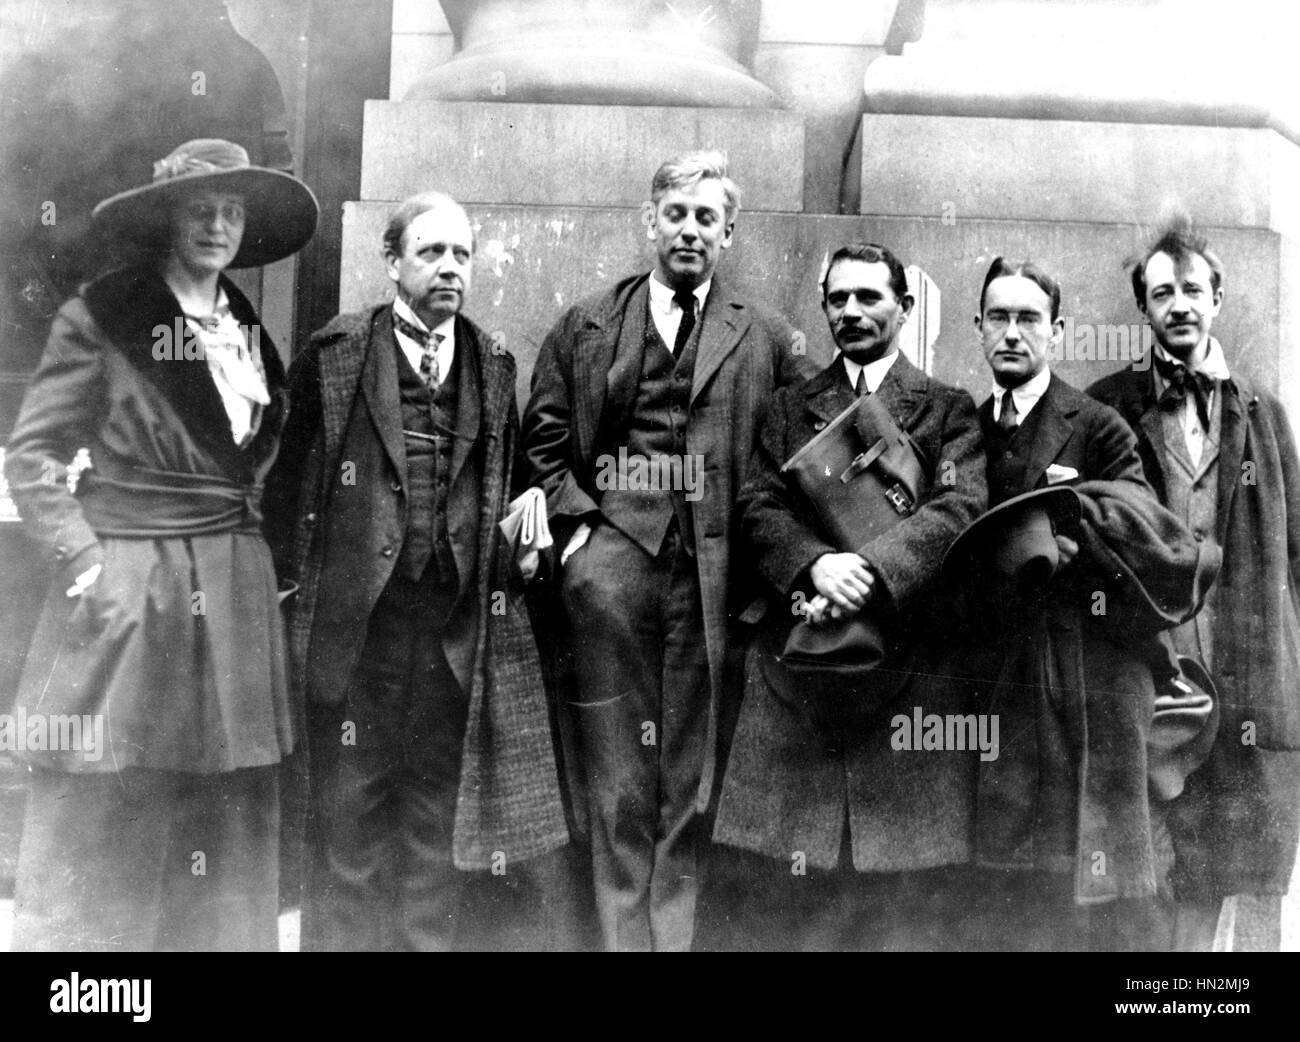 From left to right, Arthur Young, Max Eastman, Moris Hilquit, Merril Rogers and Jr Floyd Dell, publishings of 'The Masses', socialist magazine. They were later to be arraigned as Anti-Americans. May 1918 United States Washington. Archives nationales Stock Photo